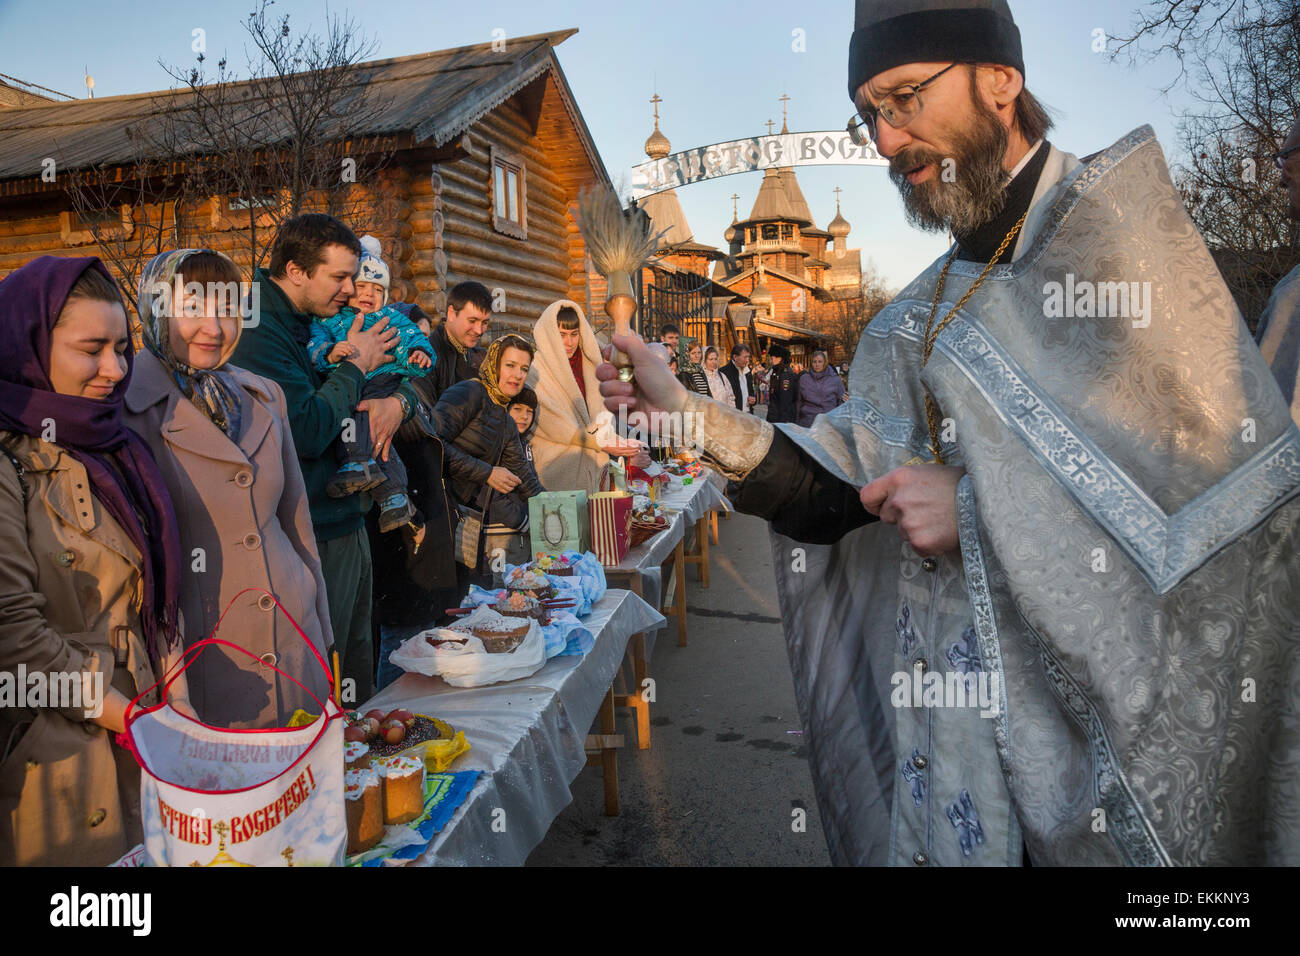 Moscow, Russia. 11 Apr, 2015. Consecration of Easter cakes on Easter Saturday near one of the wooden Church of Moscow, Russia Credit:  Nikolay Vinokurov/Alamy Live News Stock Photo